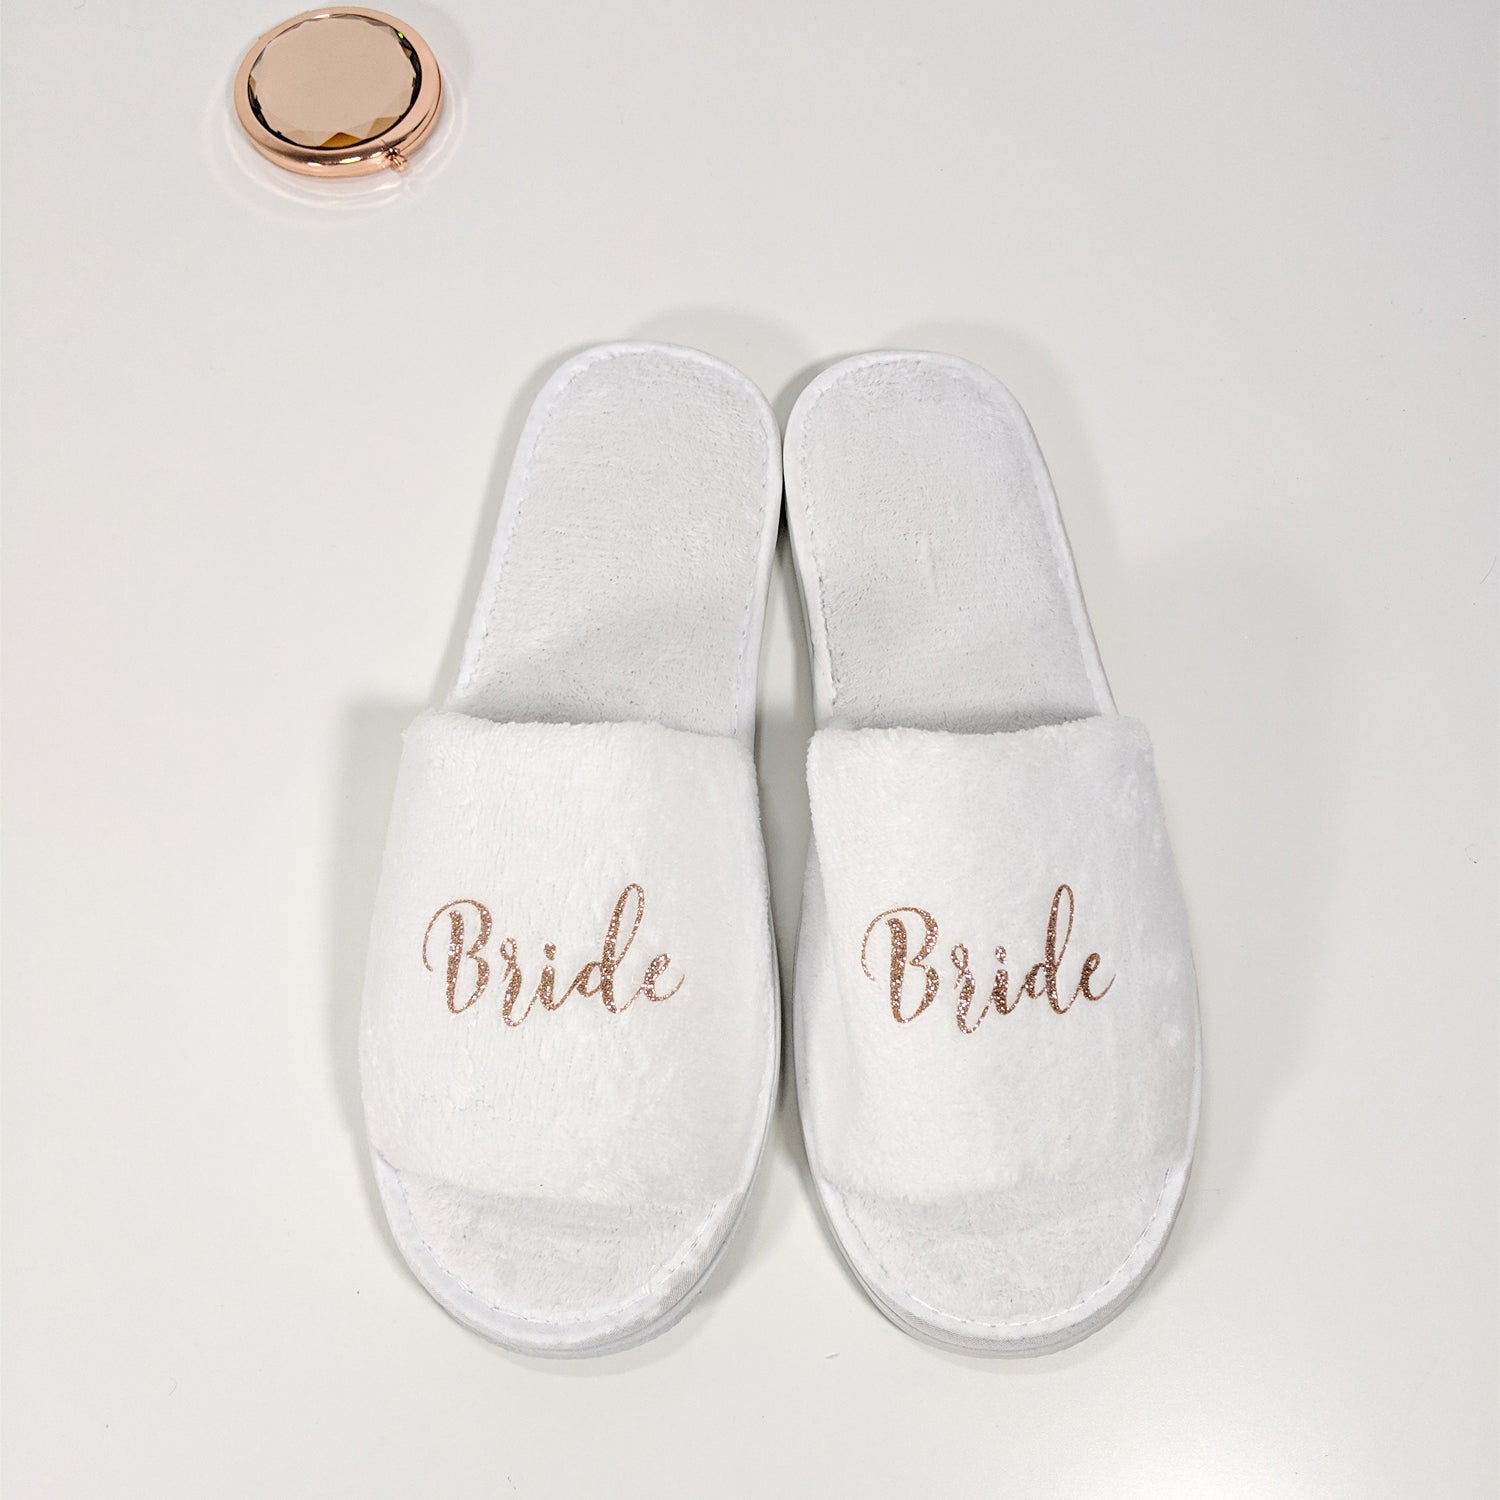 personalised slippers for her